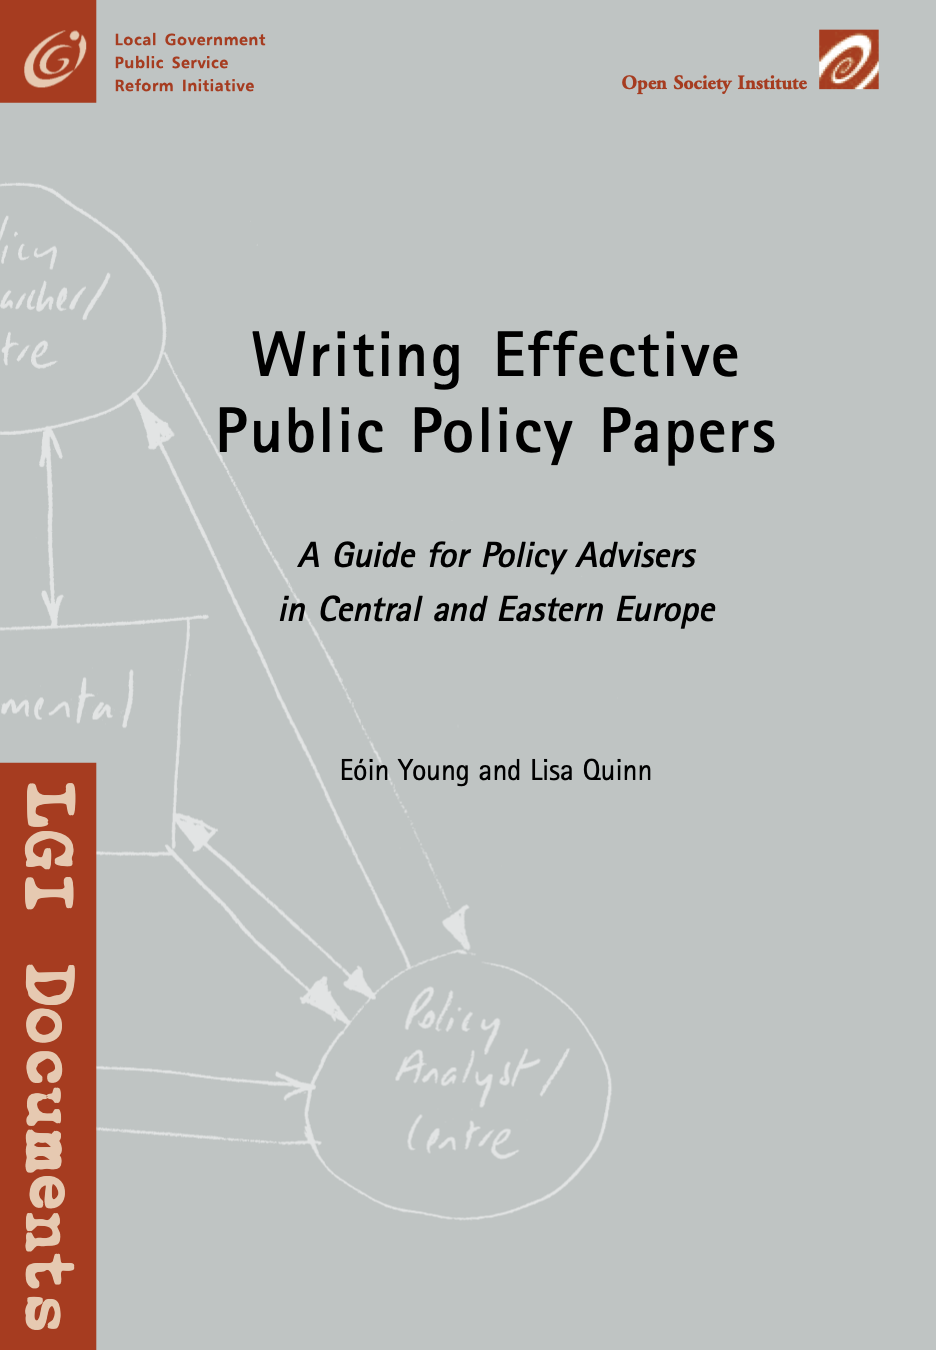 Writing Effective Public Policy Papers: A Guide to Policy Advisers in Central and Eastern Europe